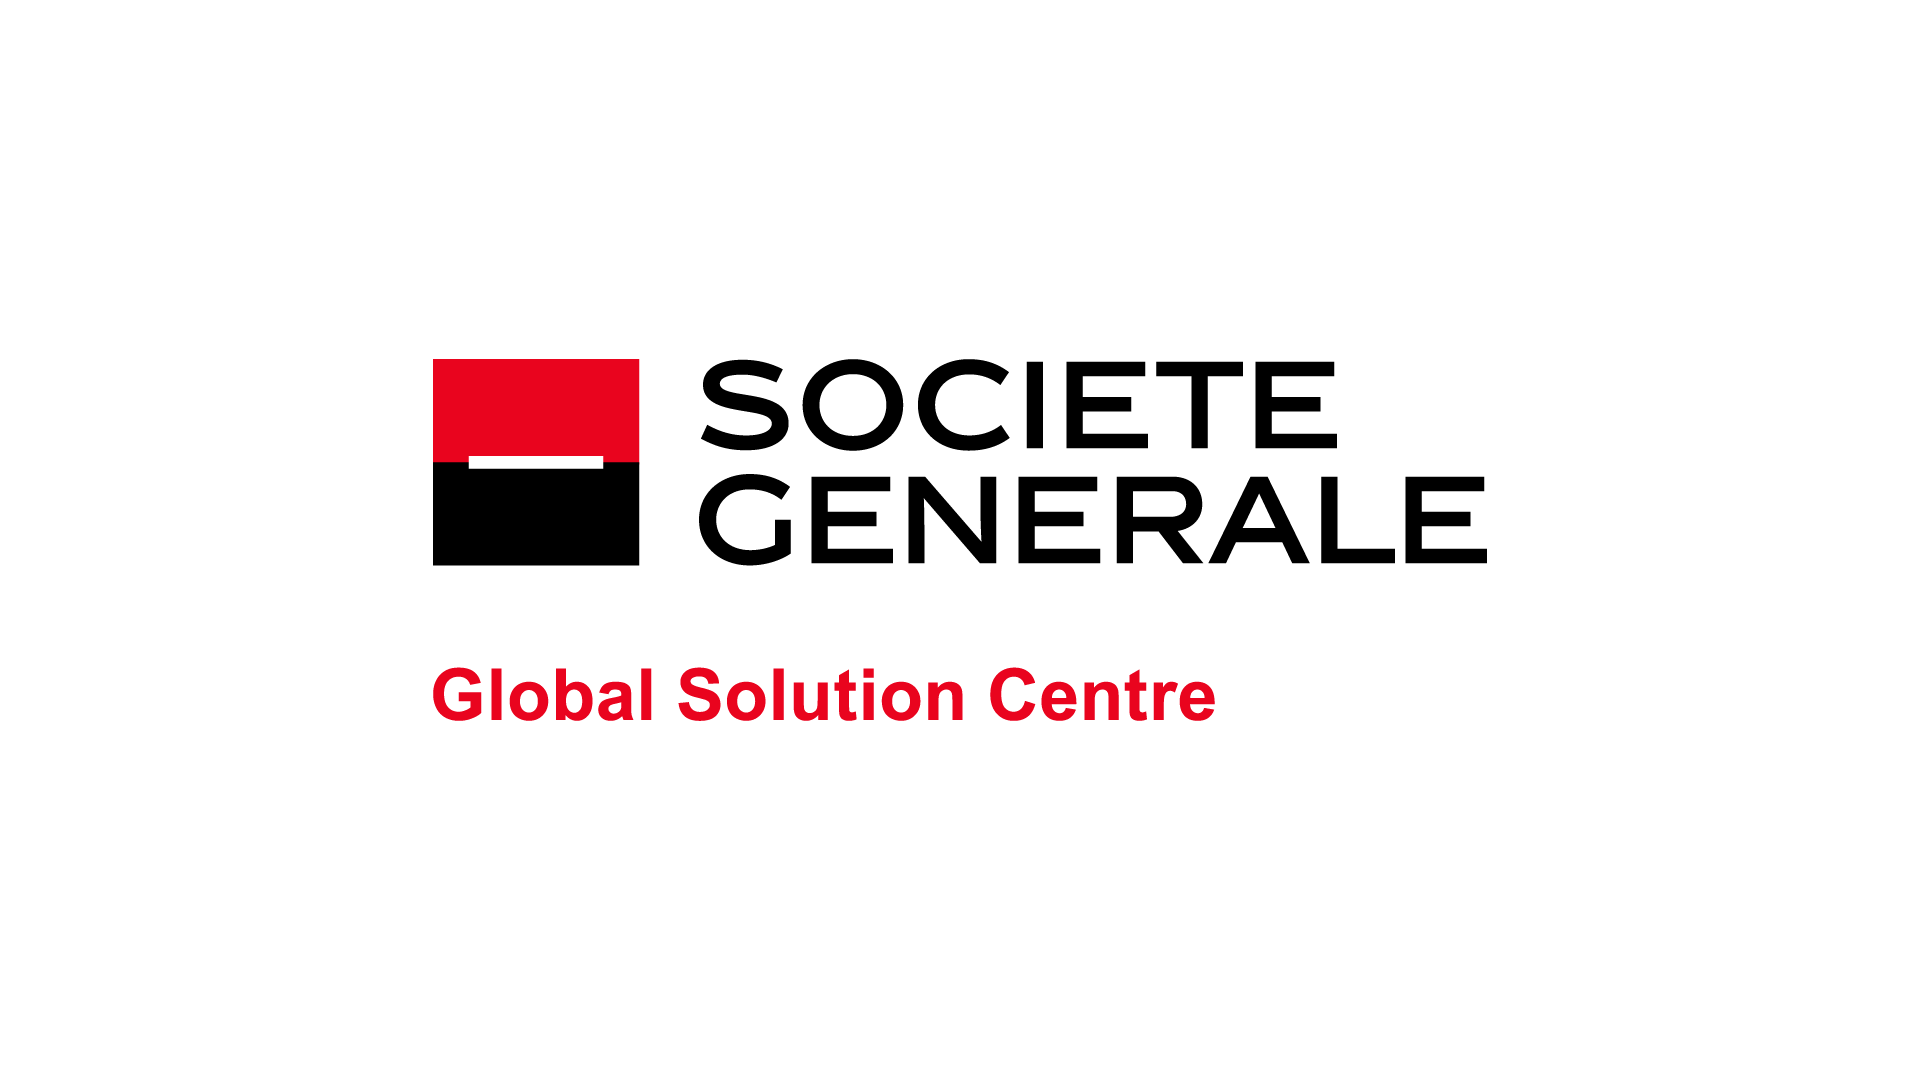 From European to Global: Societe Generaleâ€™s service centre in Romania becomes Societe Generale Global Solution Centre